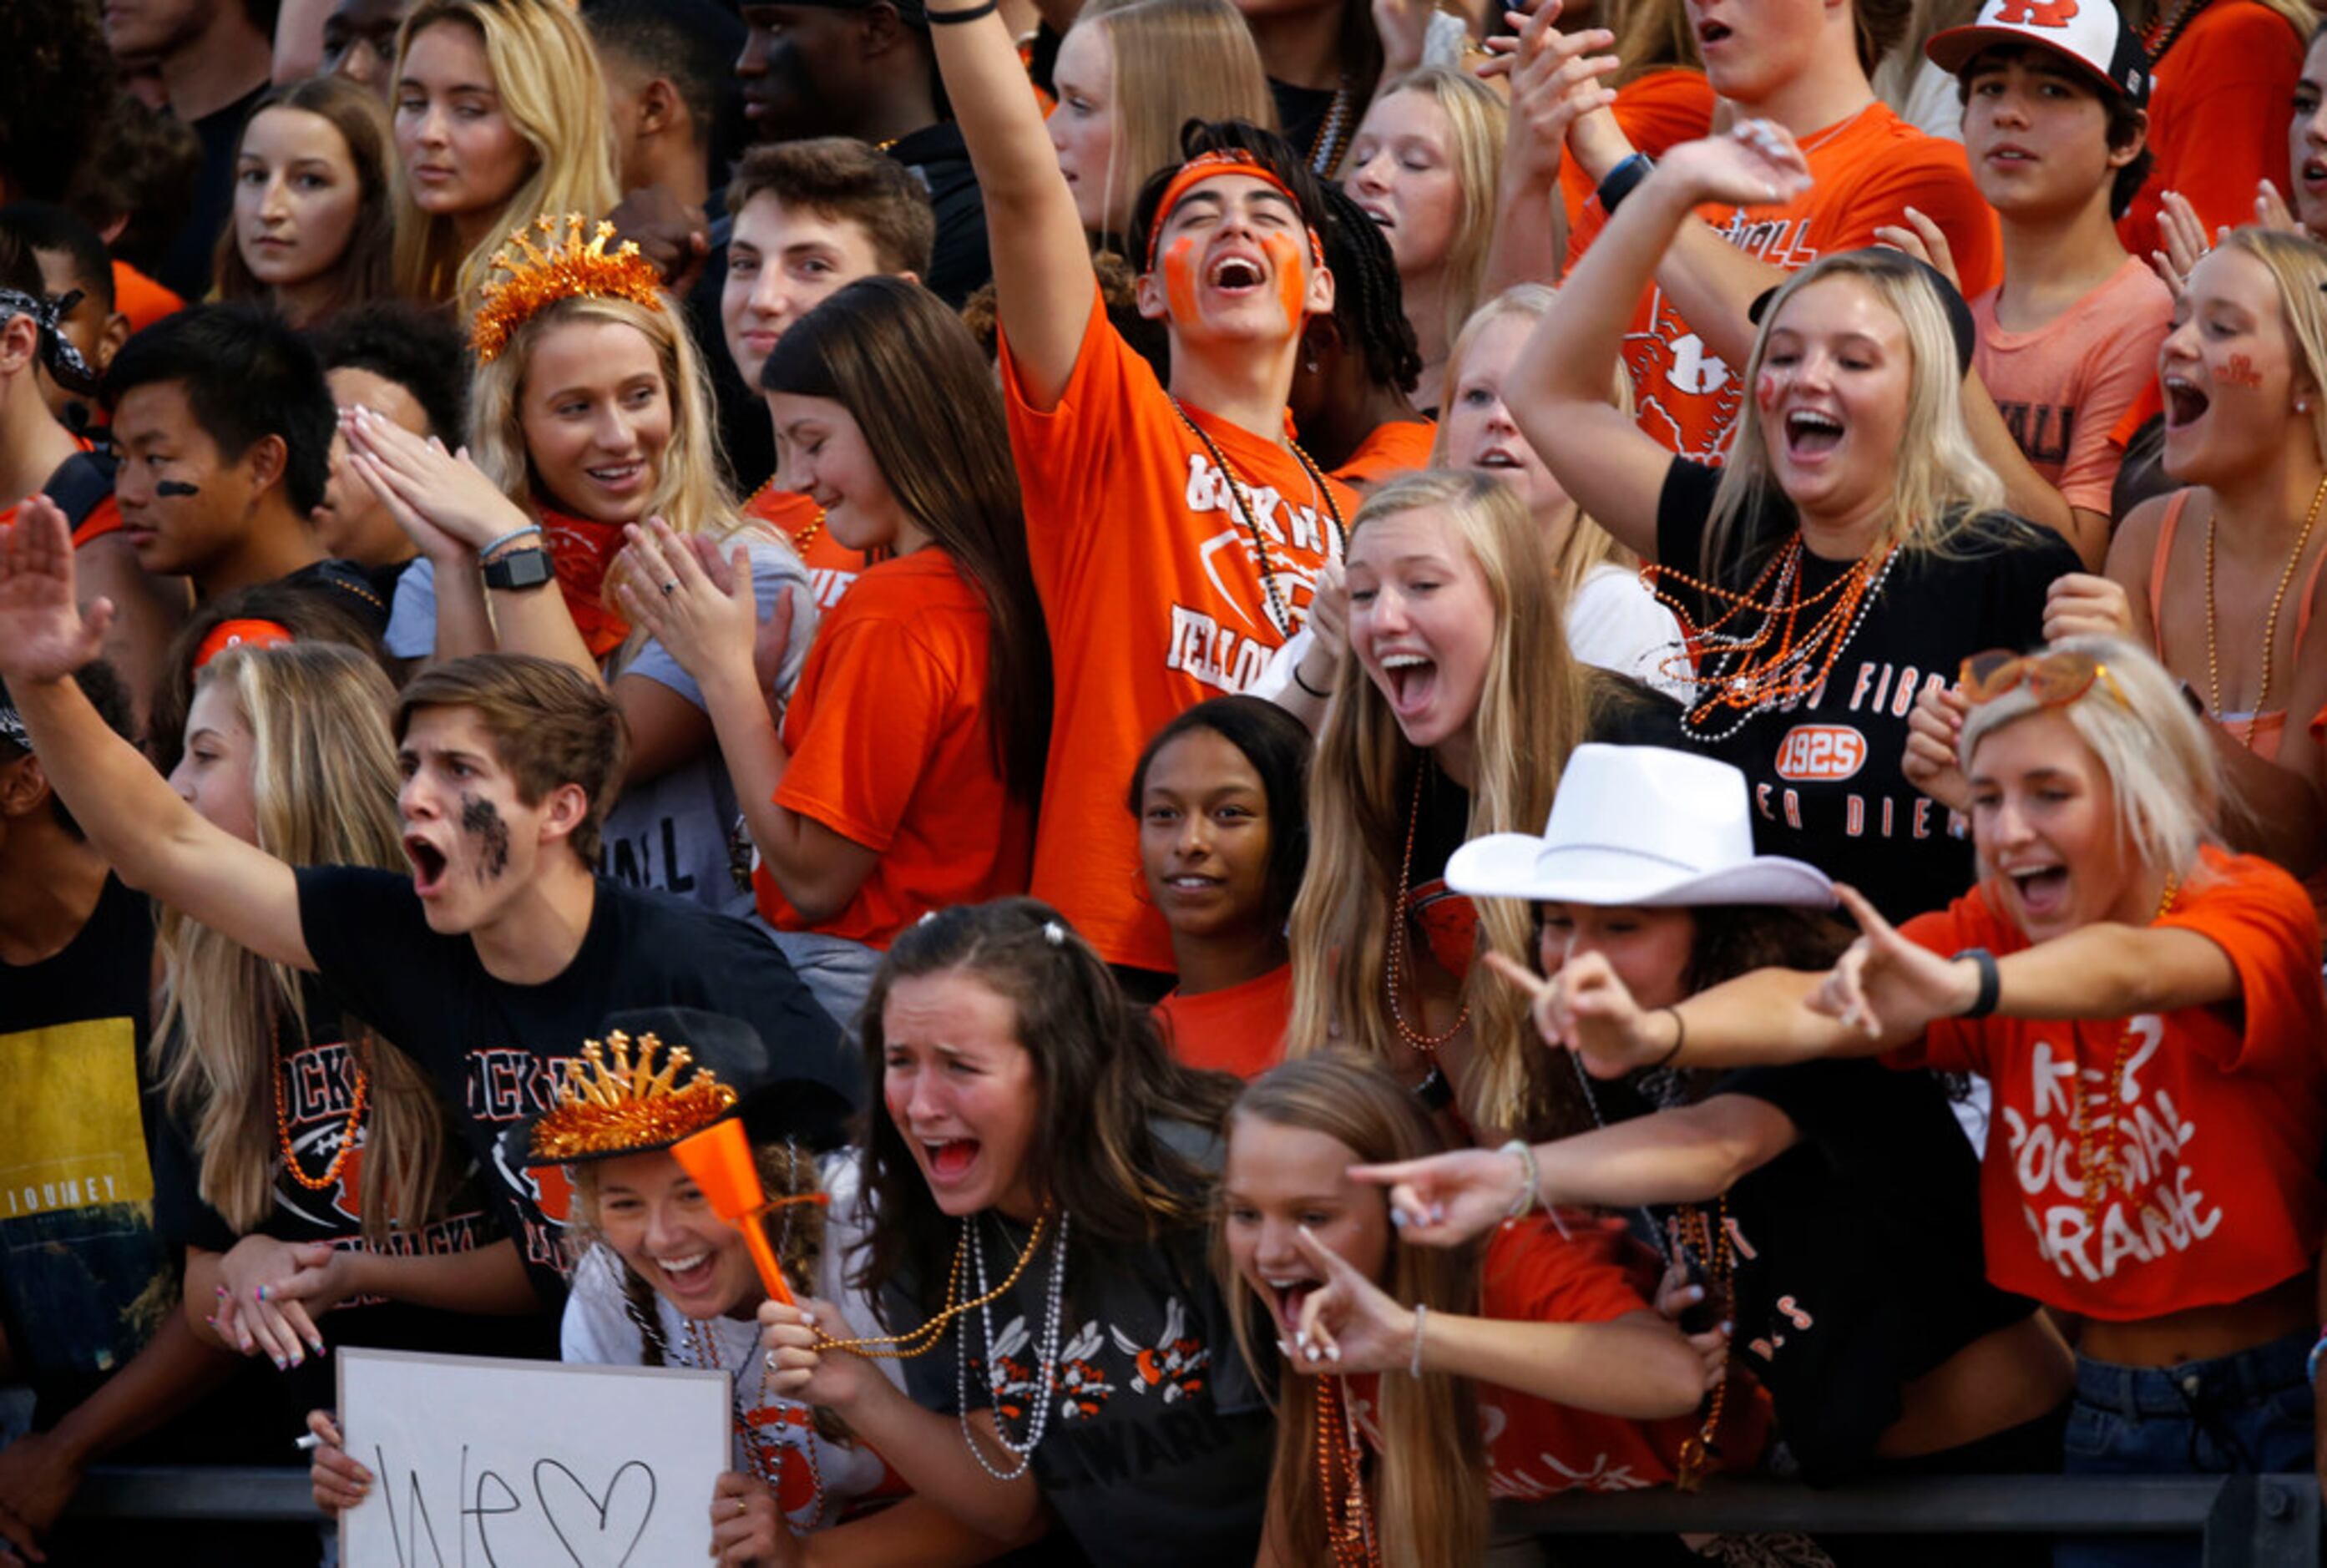 Members of the "Swarm" (Rockwall's student section) cheer on the team during the first half...